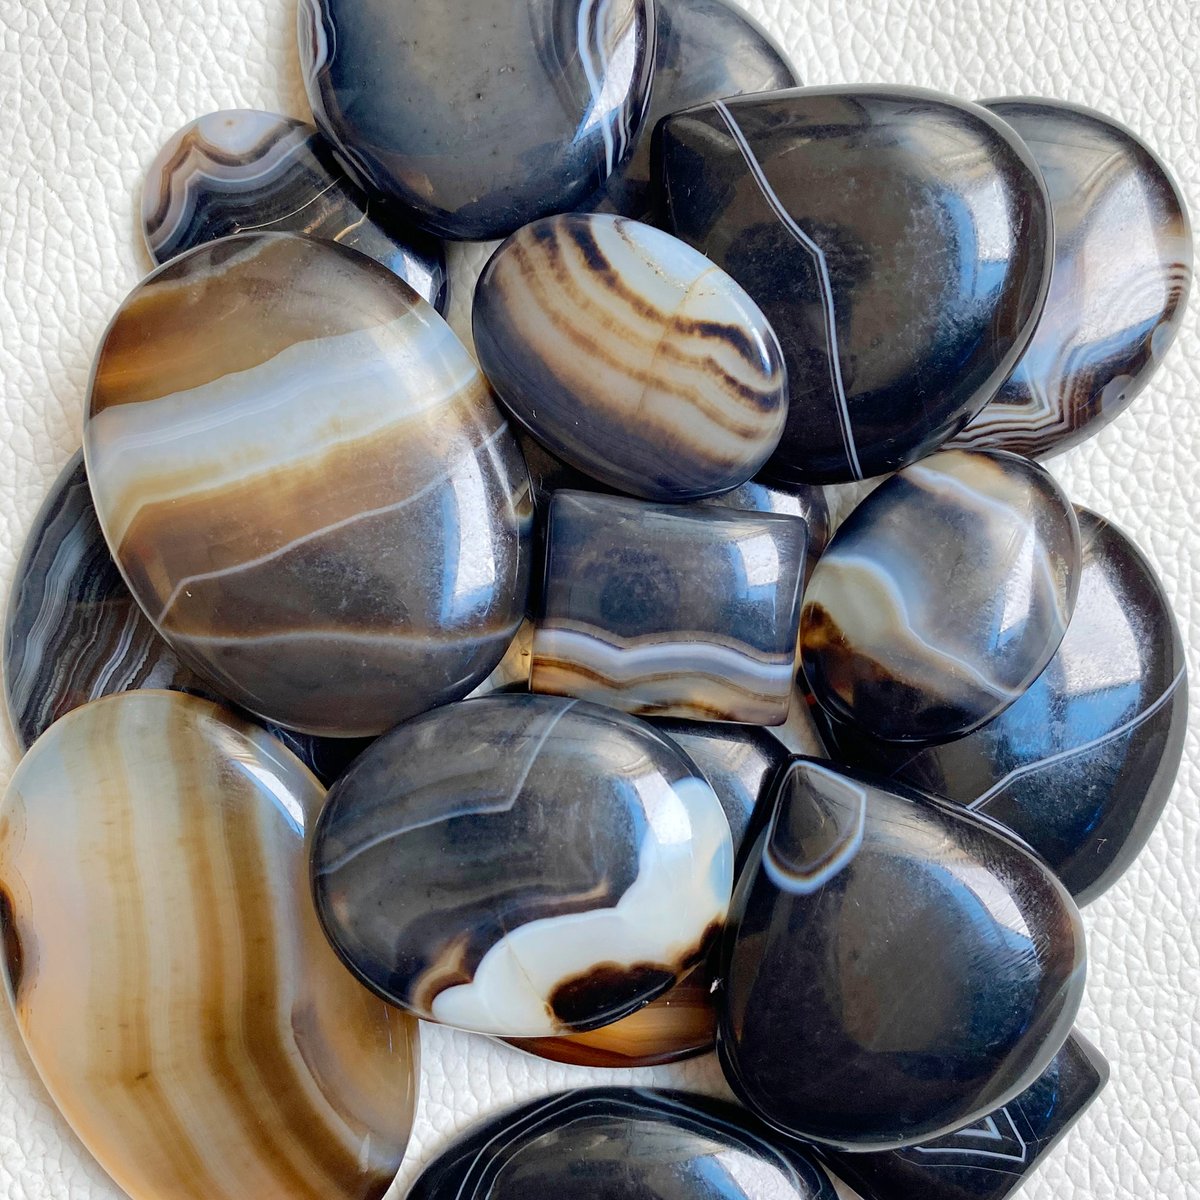 Natural Banded Agate

We accept payment through PayPal/Bank Transfer
• 100% secure checkout with PayPal/Bank Transfer

#gemstone #cabochon #jewelrystone #naturalstone #loosegemstone #crystalgemstone #healinggemstone #bandedagate #bandedagatejewelry #bandedagatependant